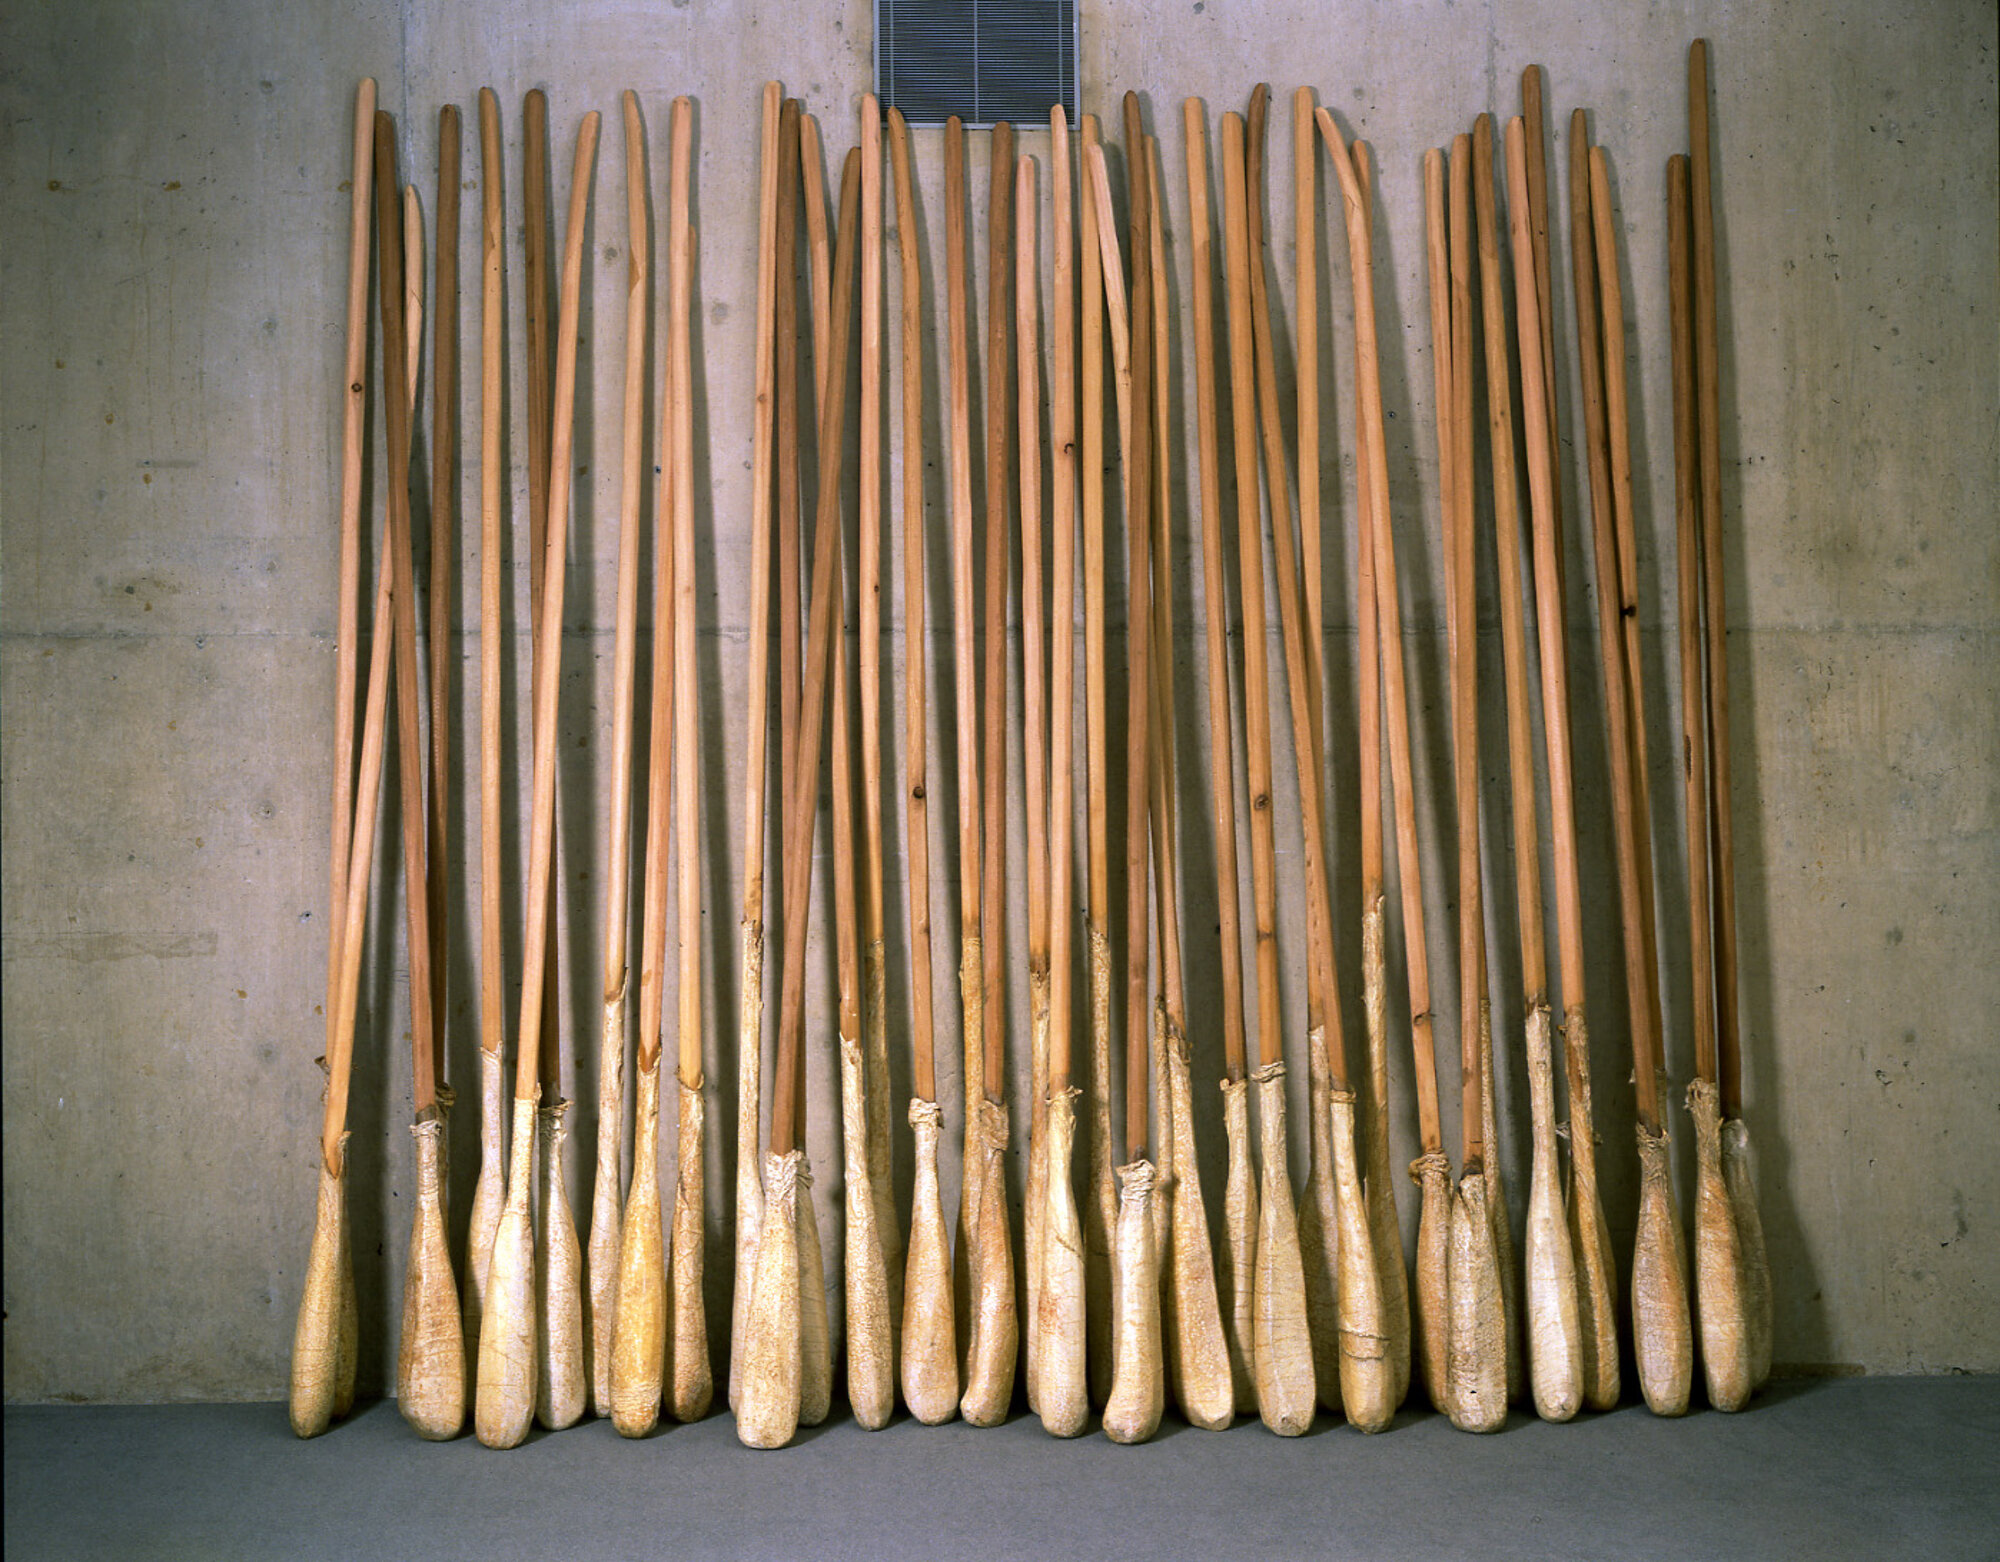       Socks on my spoons , 1995 Cedar and tripe 194 x 120 x 16 in.    MORE IMAGES   University of Massachusetts at Amherst  